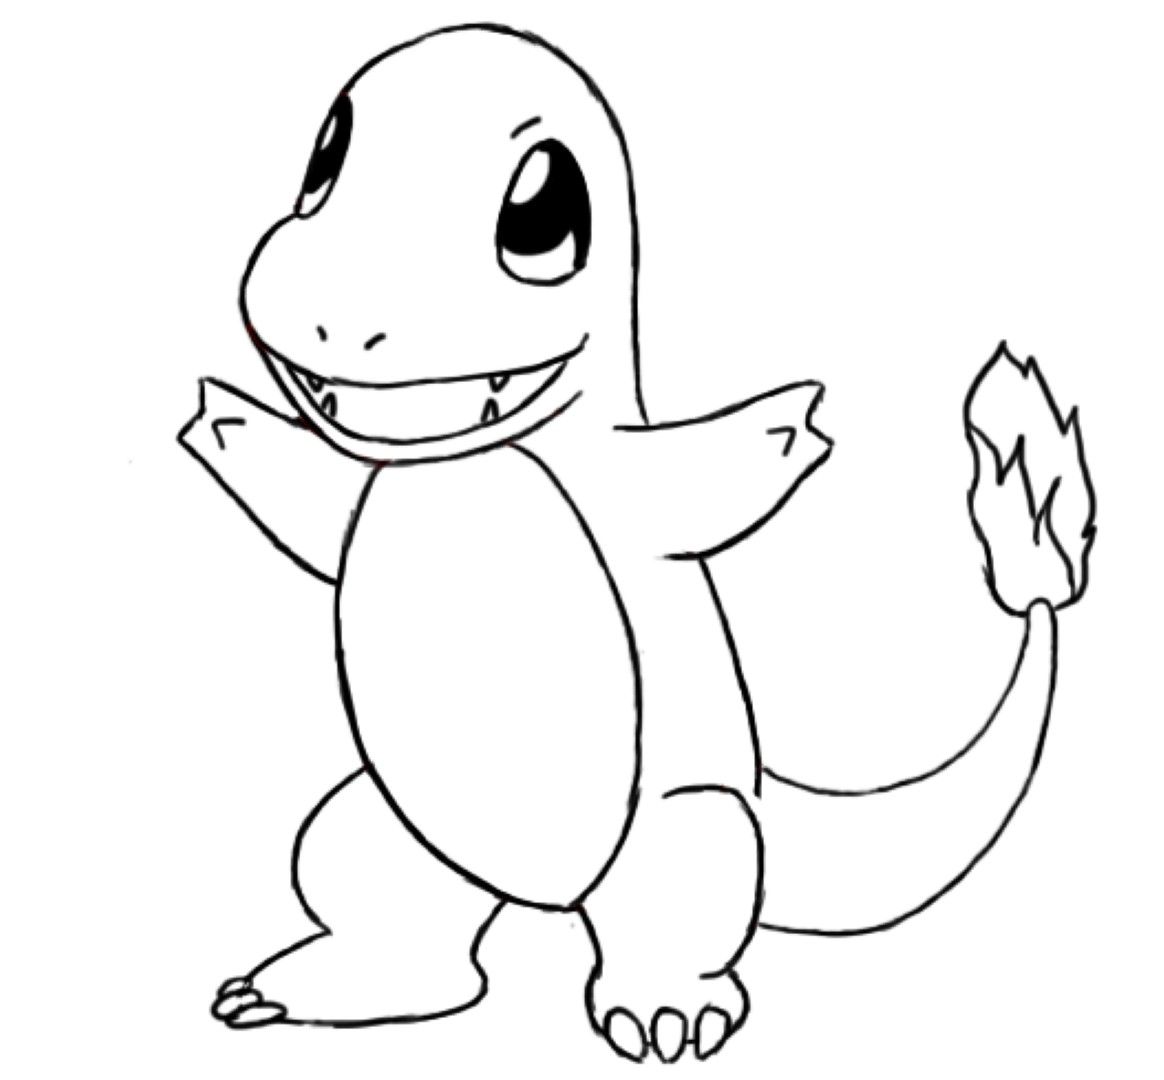 Pokemon Charmander Coloring Pages Coloring Home Charizard flies around the sky in search of powerful opponents. pokemon charmander coloring pages